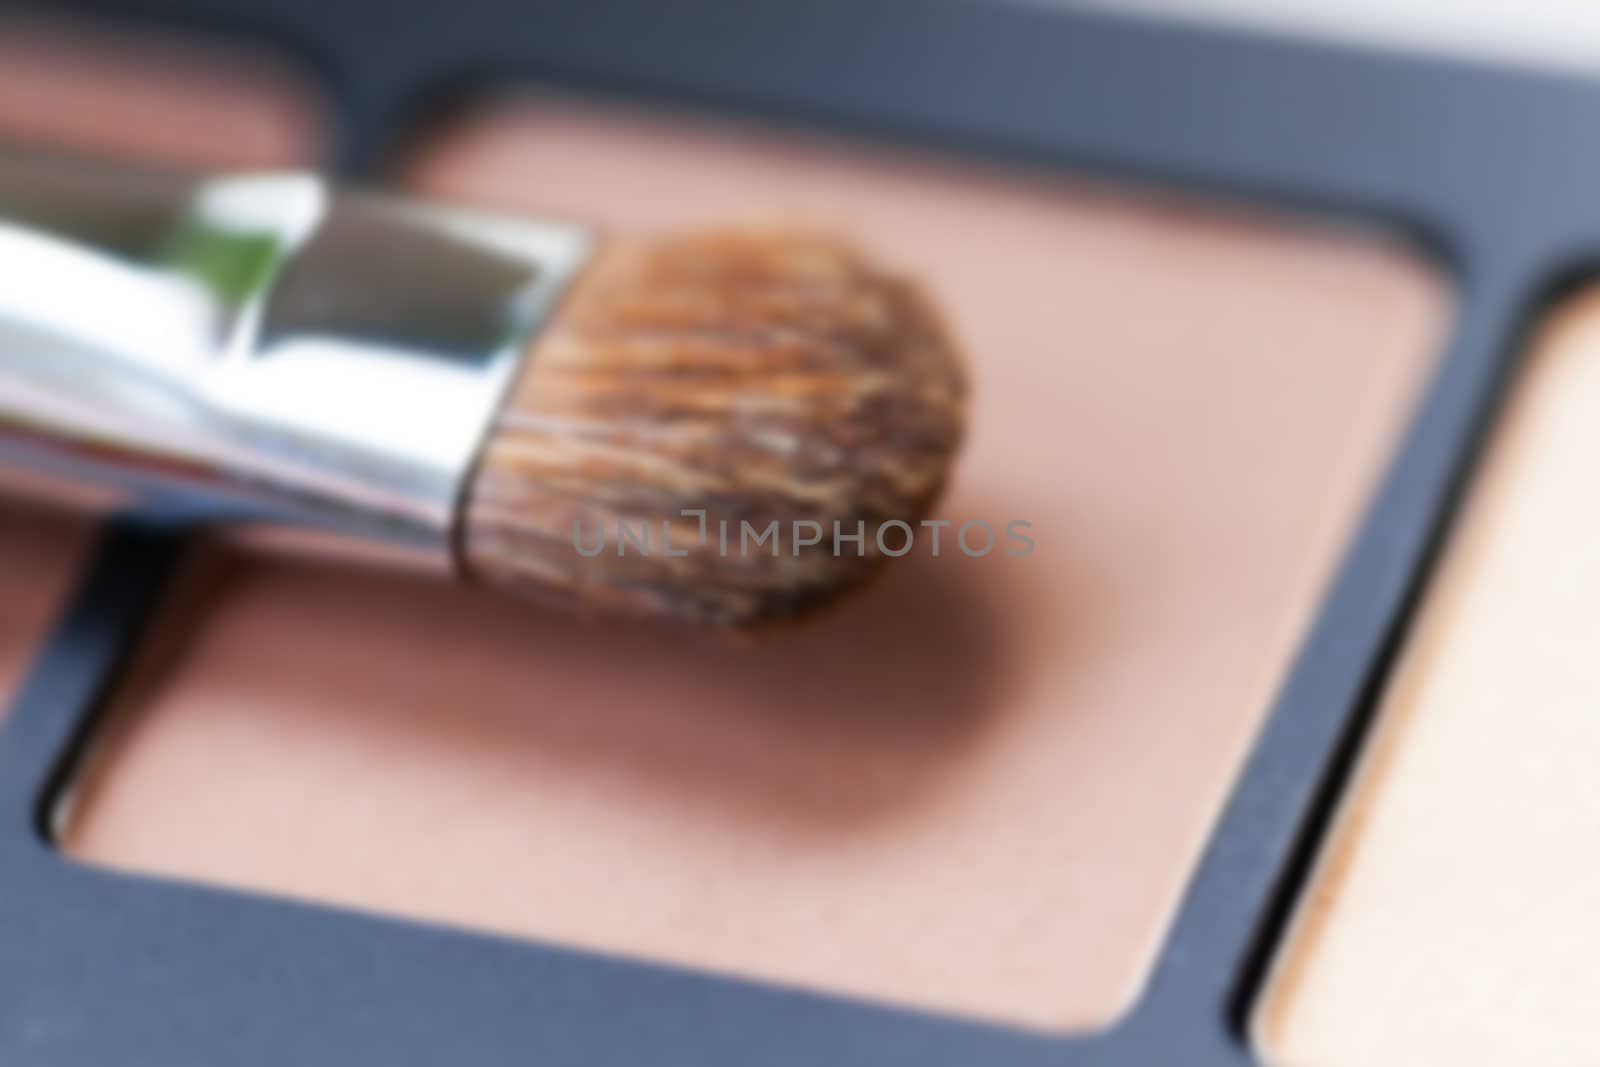 decorative cosmetic, eye shadow photographed close-up, disfocus